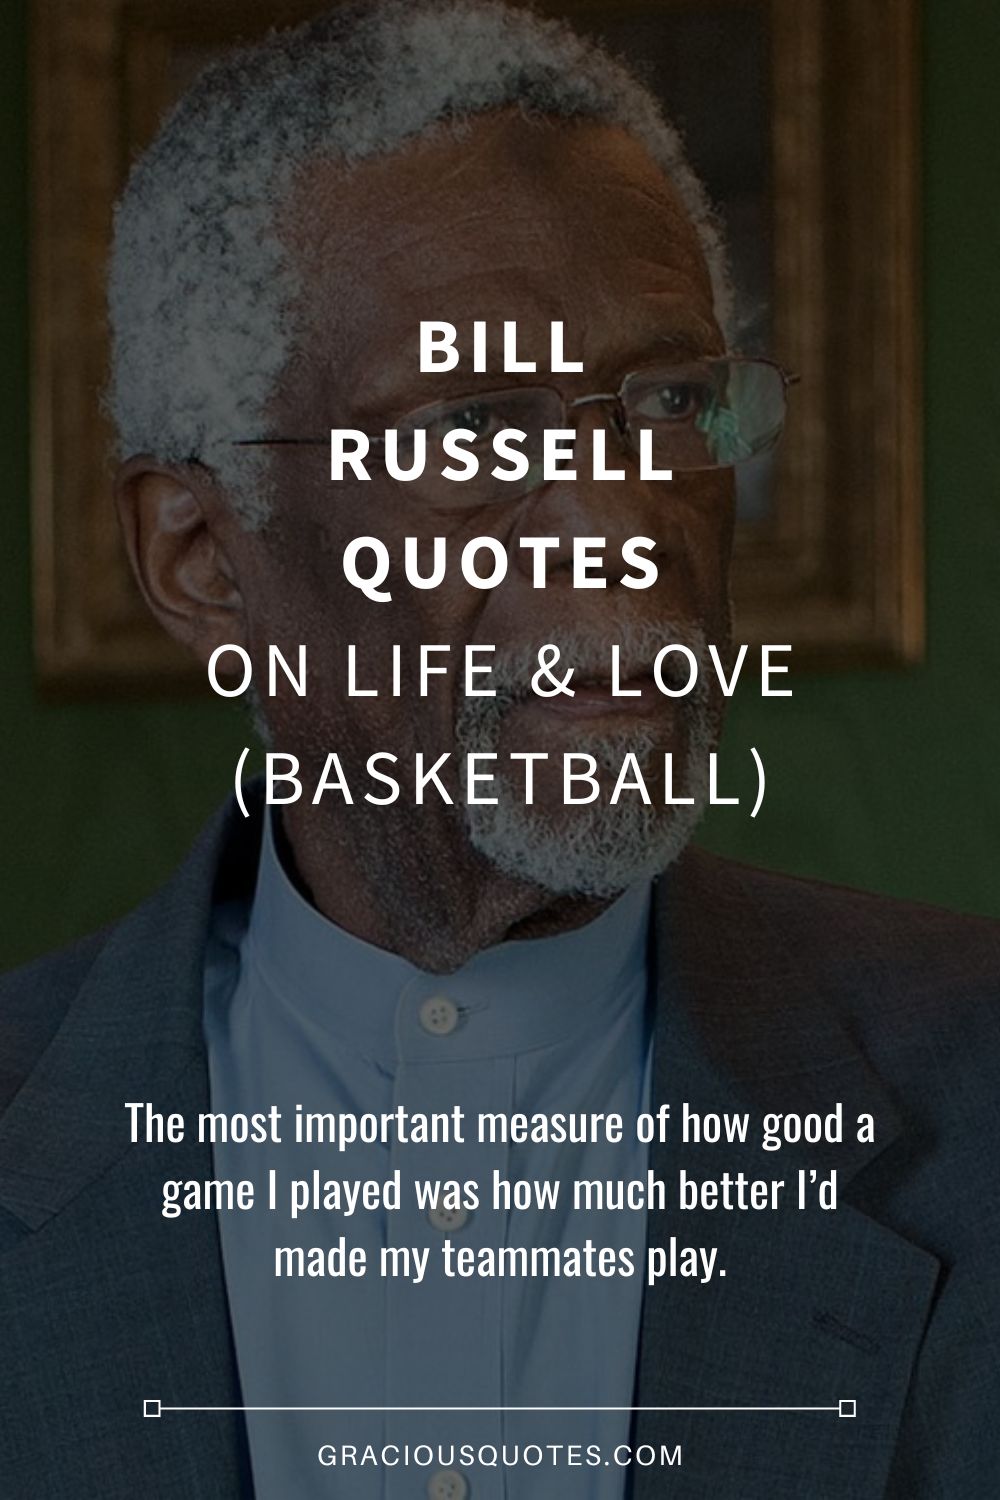 Bill Russell Quotes on Life & Love (BASKETBALL) - Gracious Quotes